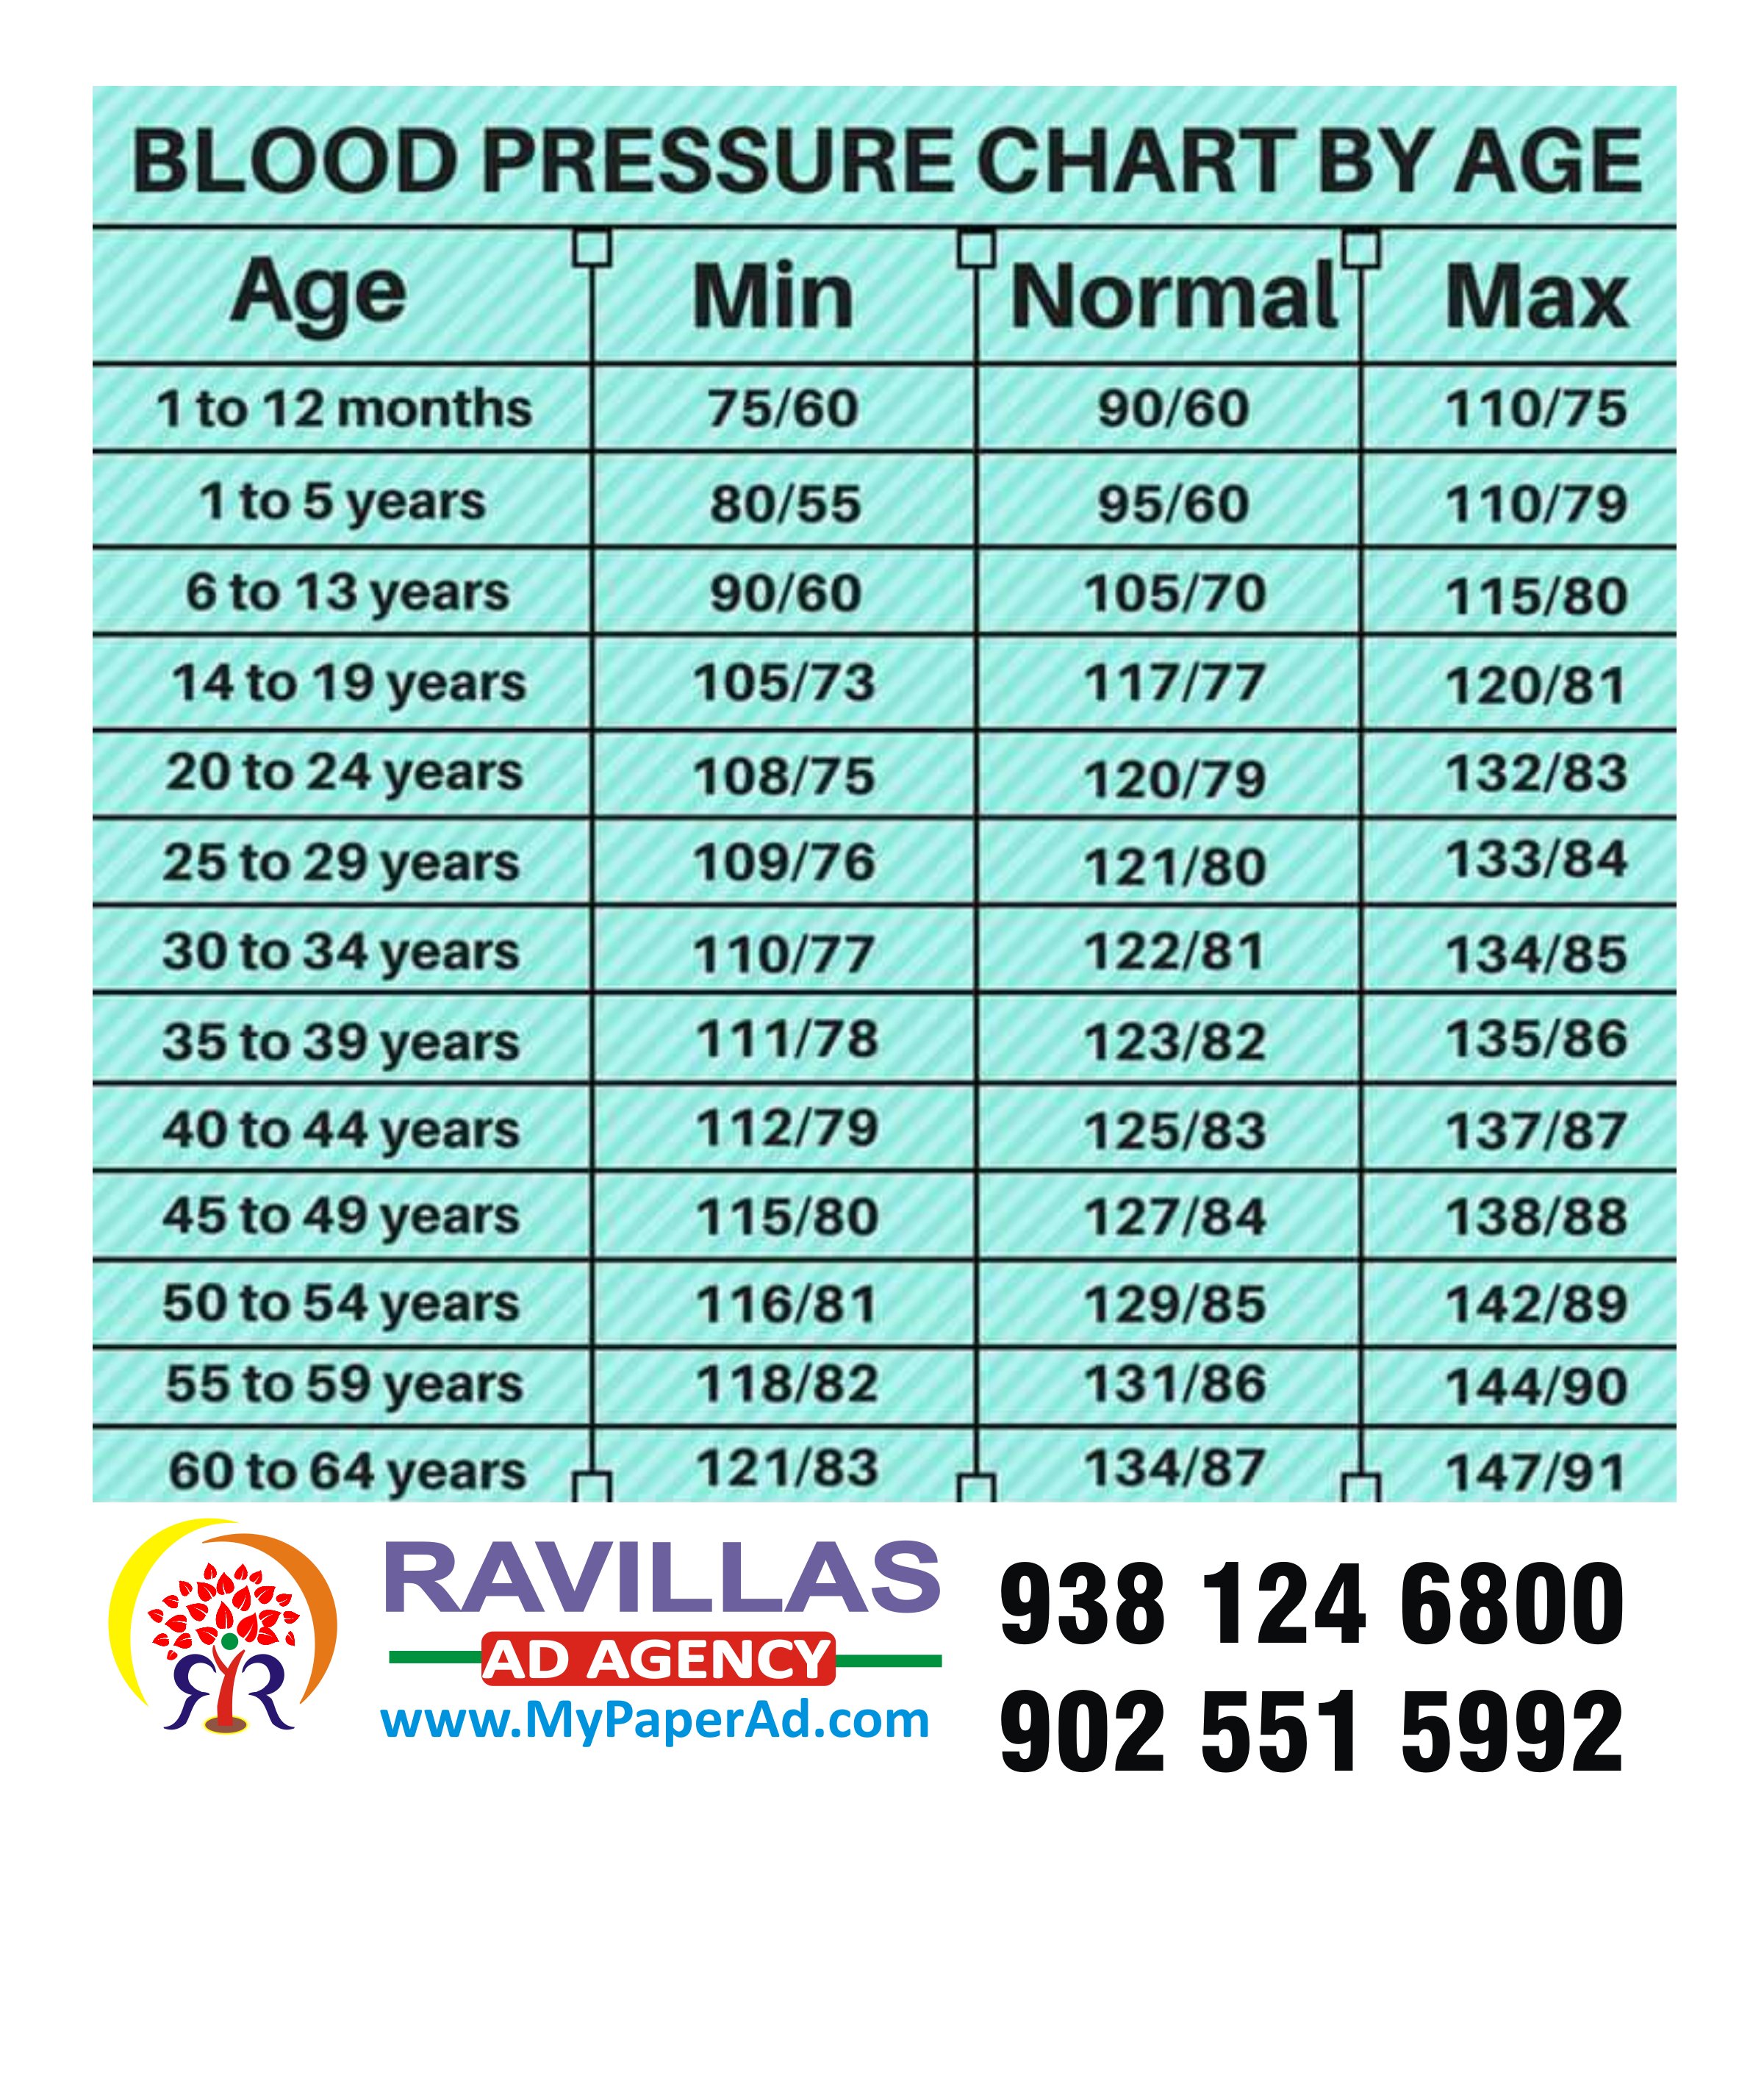 Ravillas Ad Agency Blood Pressure Chart Use The Blood Pressure Chart Below To See What Your Blood Pressure Means The Blood Pressure Chart Is Suitable For Adults Of Any Age